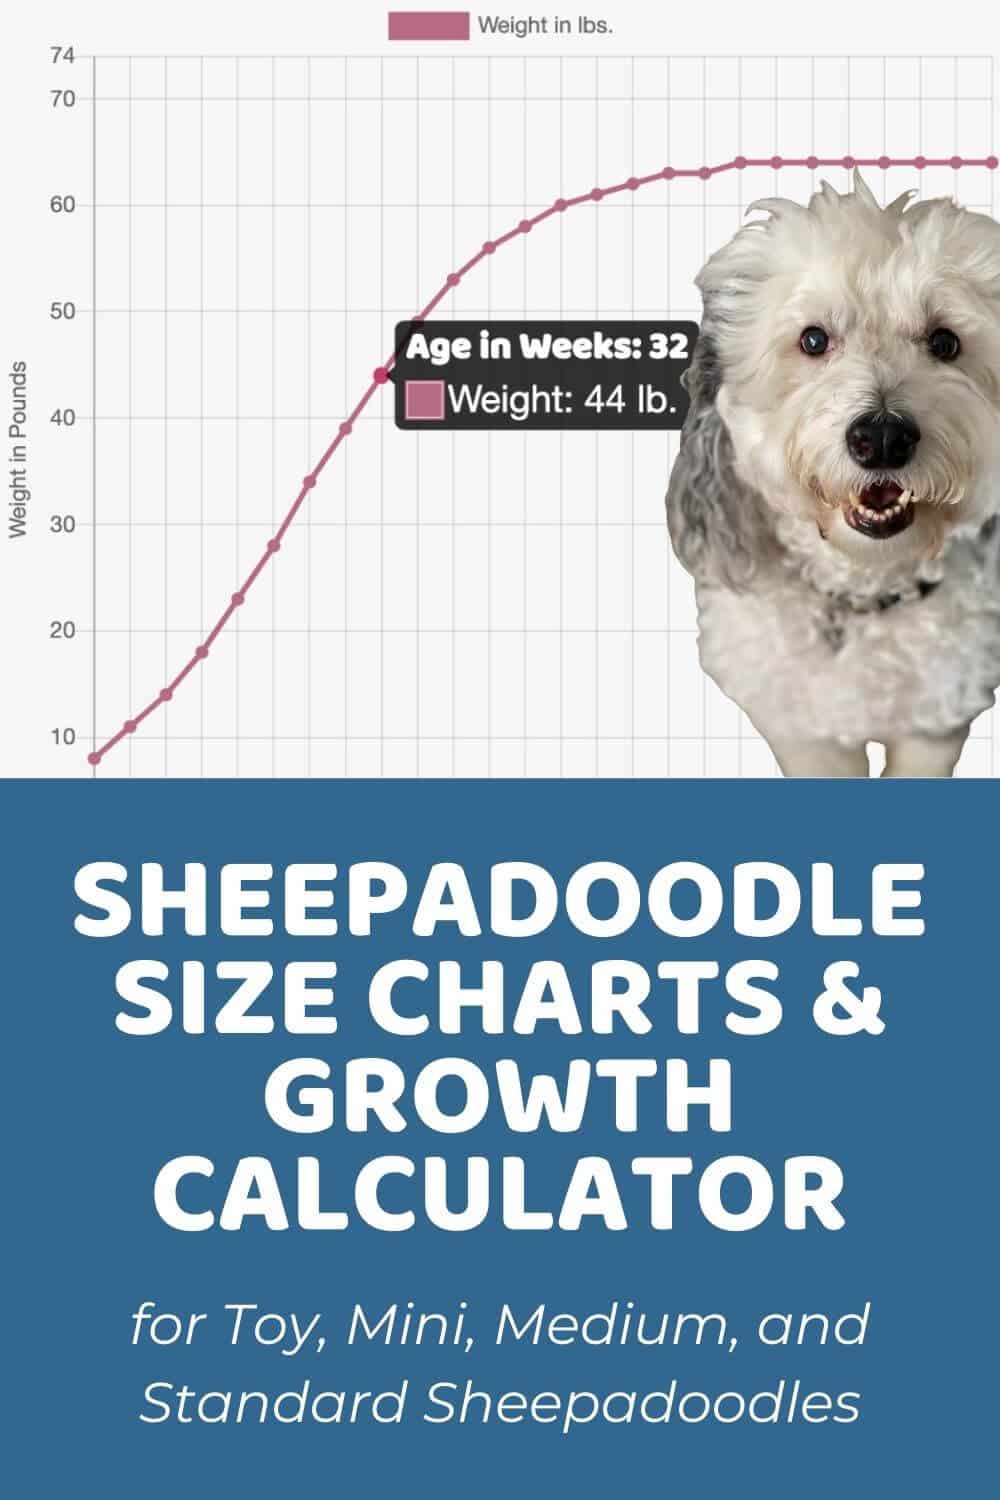 Sheepadoodle Size Chart for Toy, Mini, Medium, and Standard Sheepadoodles